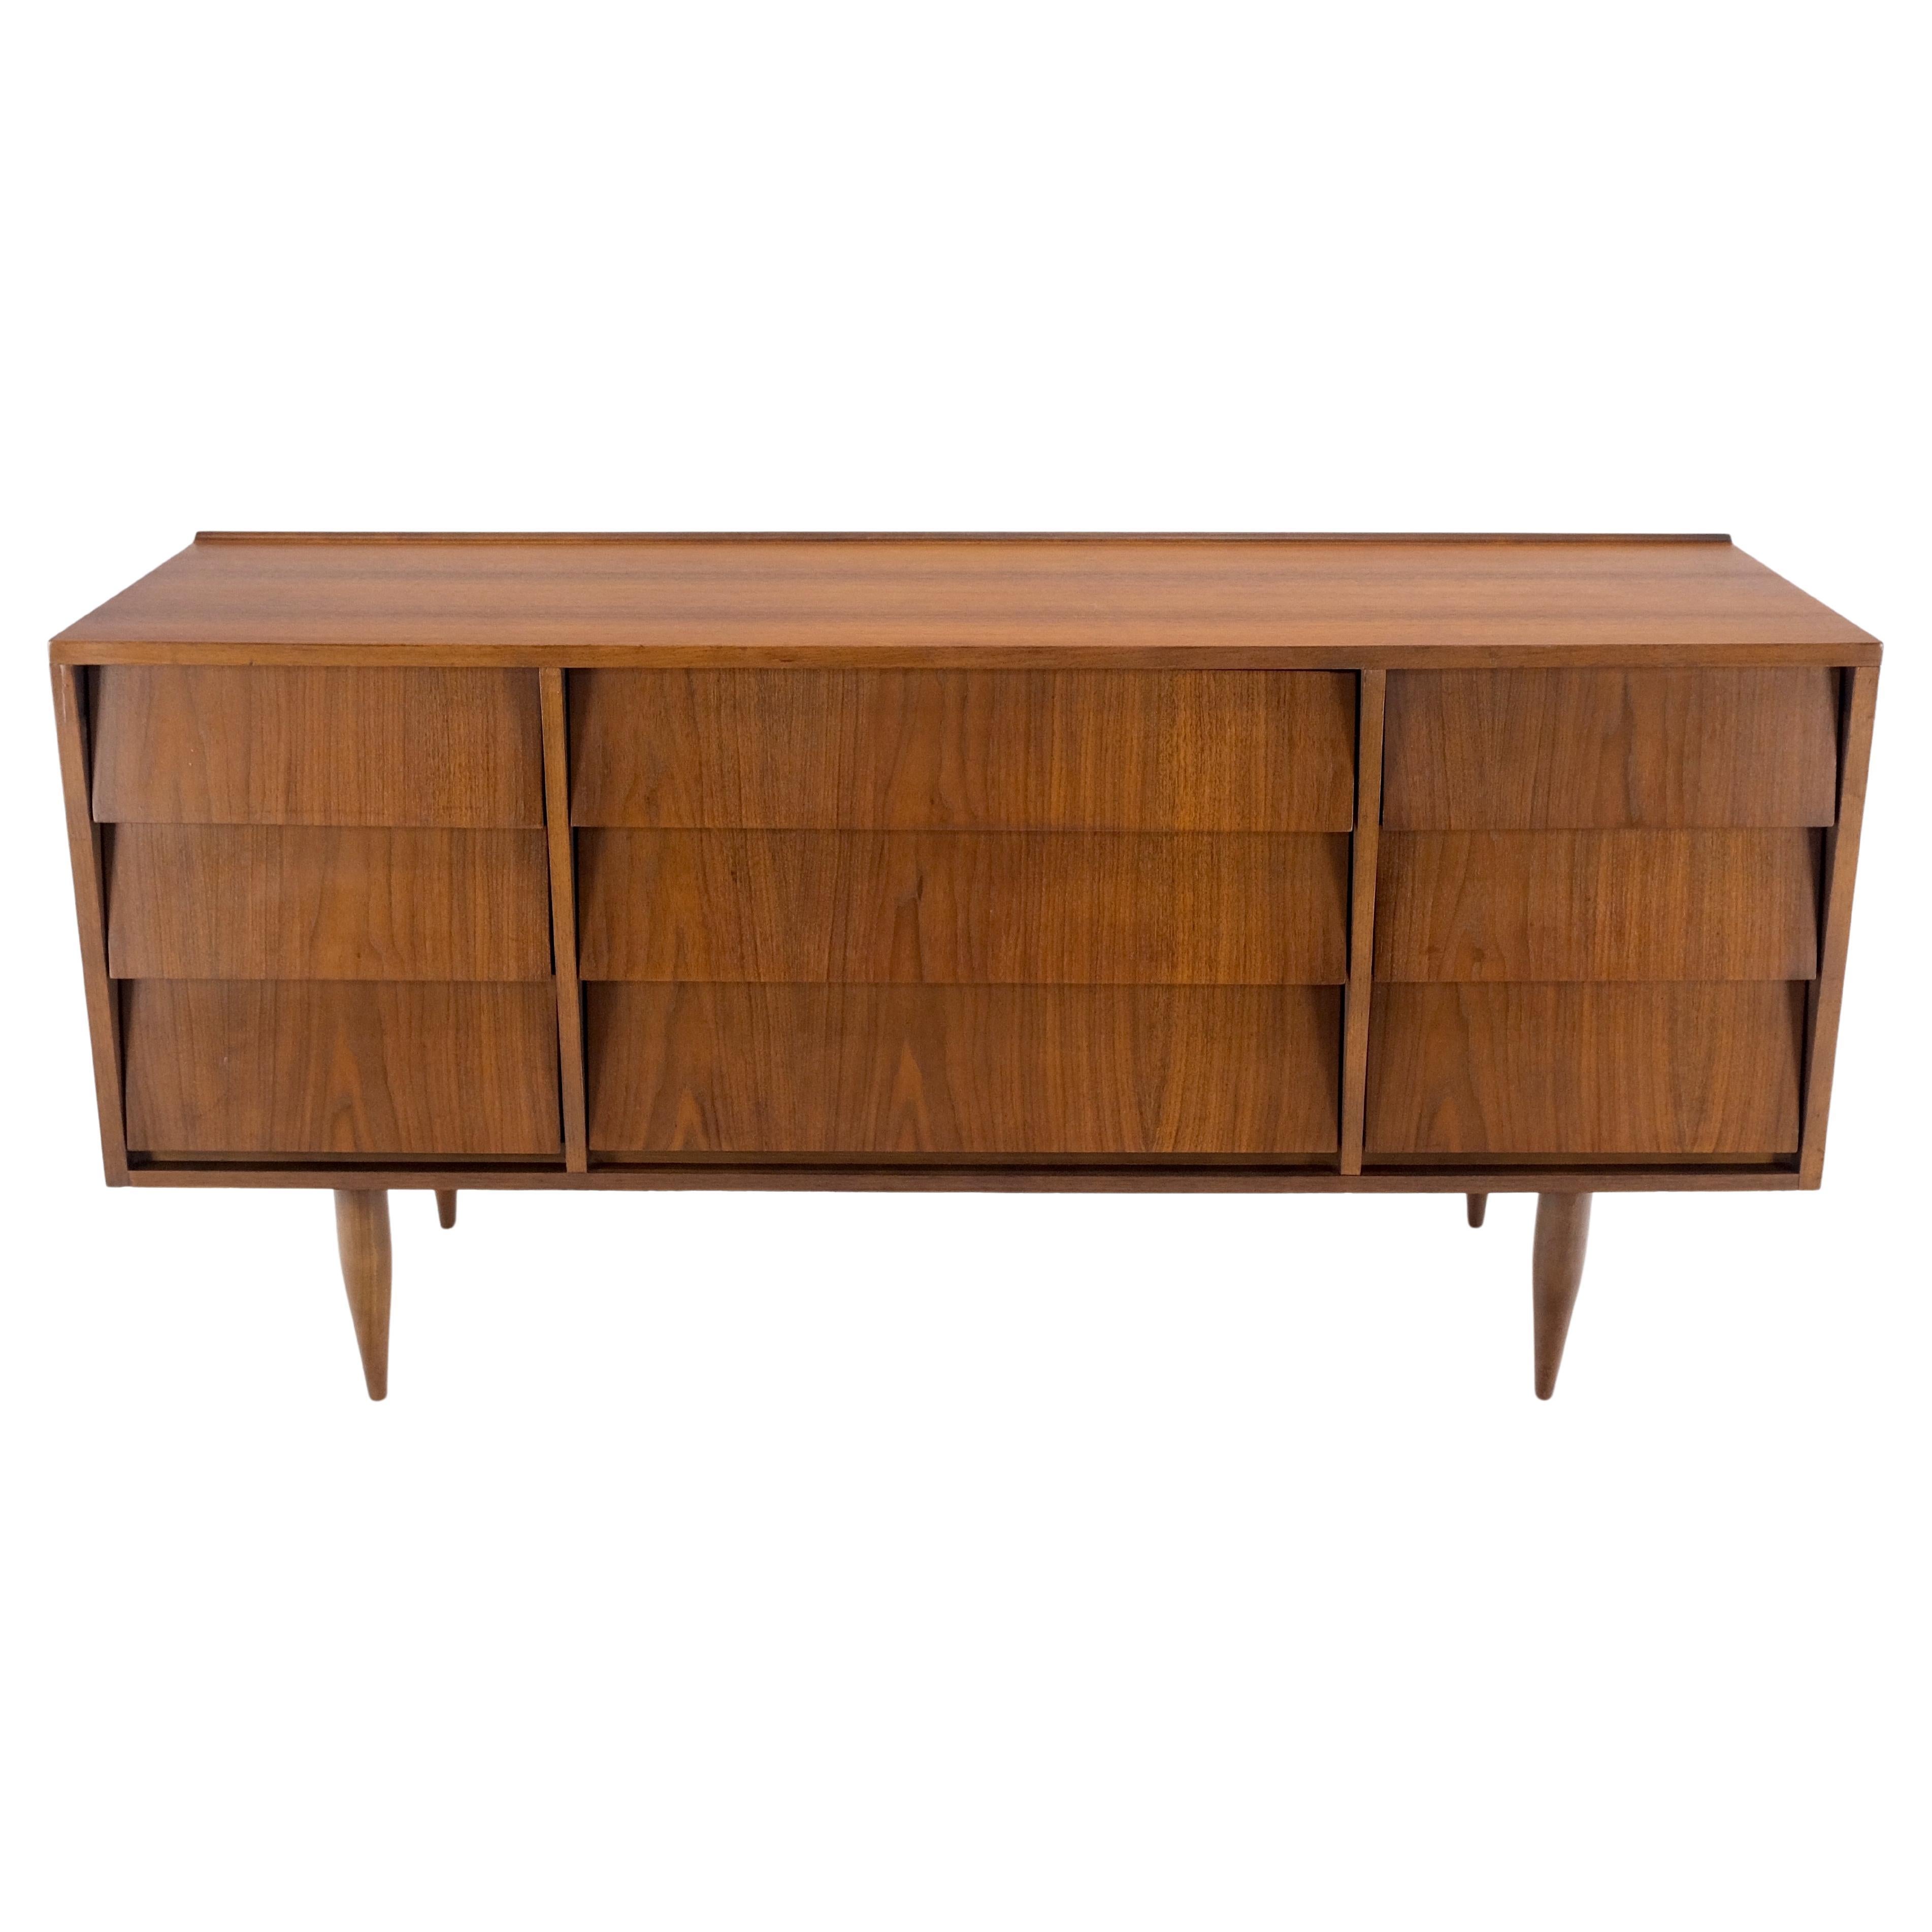 Louver Front 9 Drawers Long Credenza Dresser American Mid-Century Modern Mint! For Sale